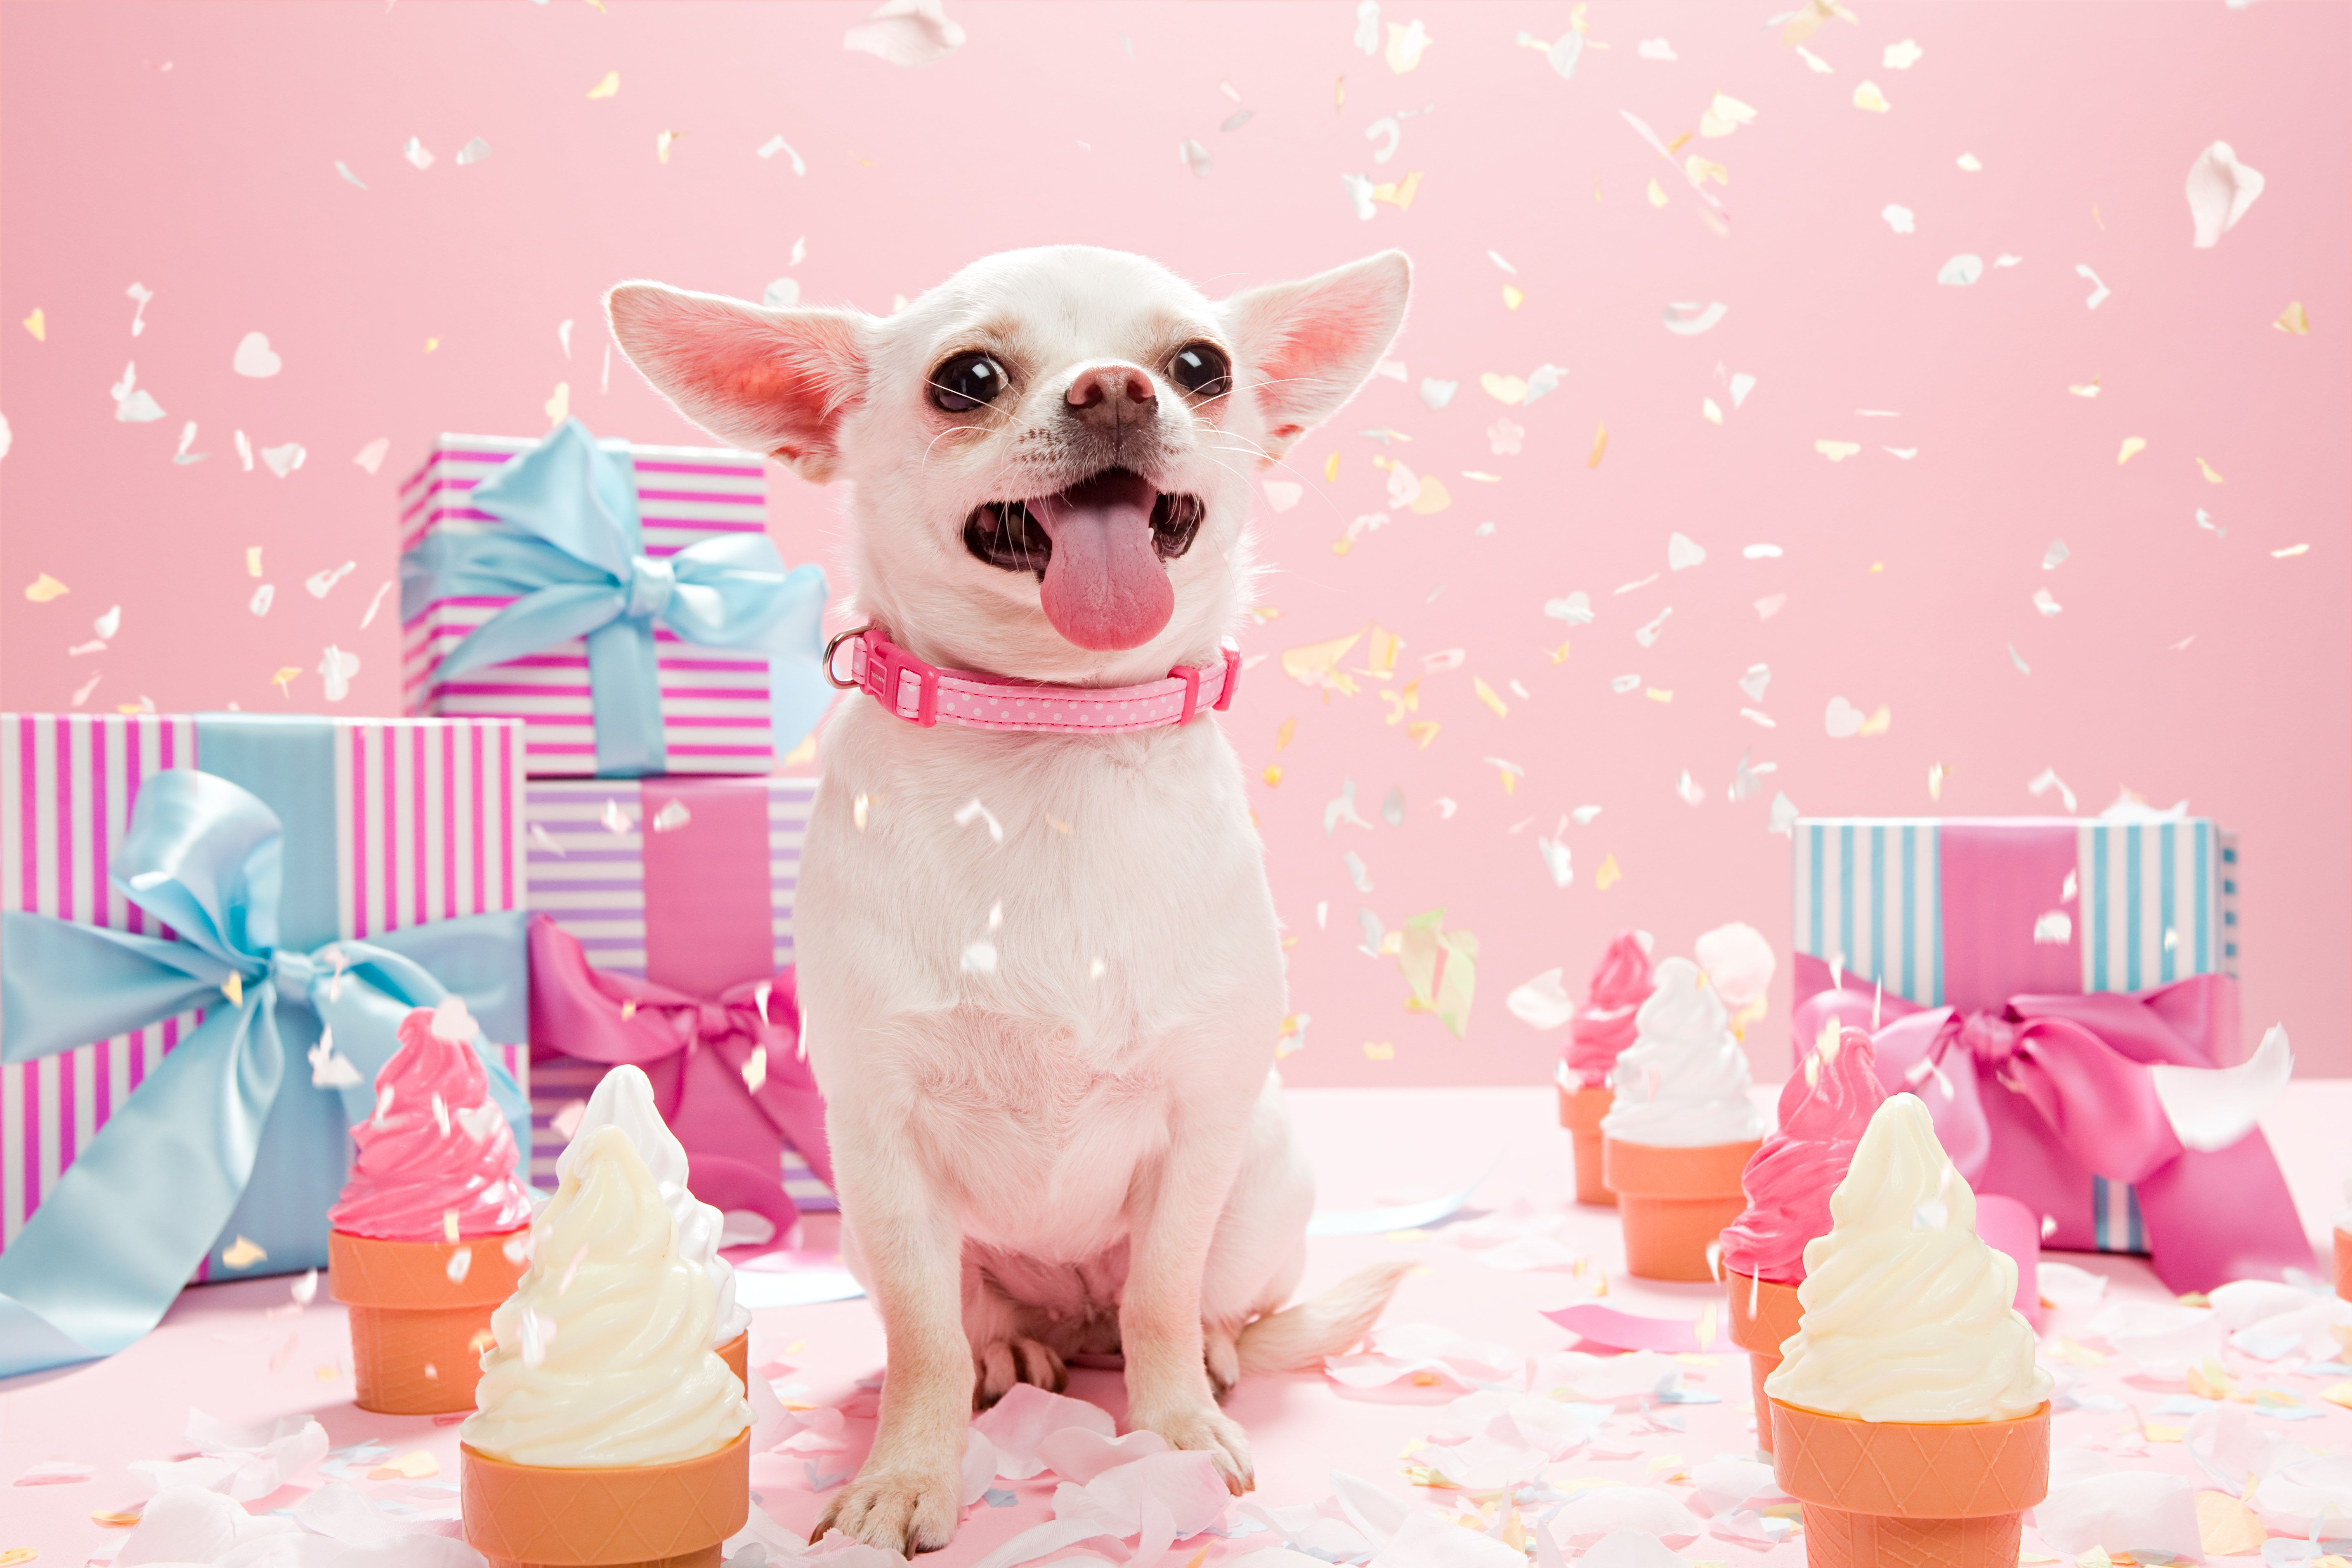 https://hips.hearstapps.com/hmg-prod/images/chihuahua-with-confetti-and-birthday-gifts-royalty-free-image-1689377281.jpg